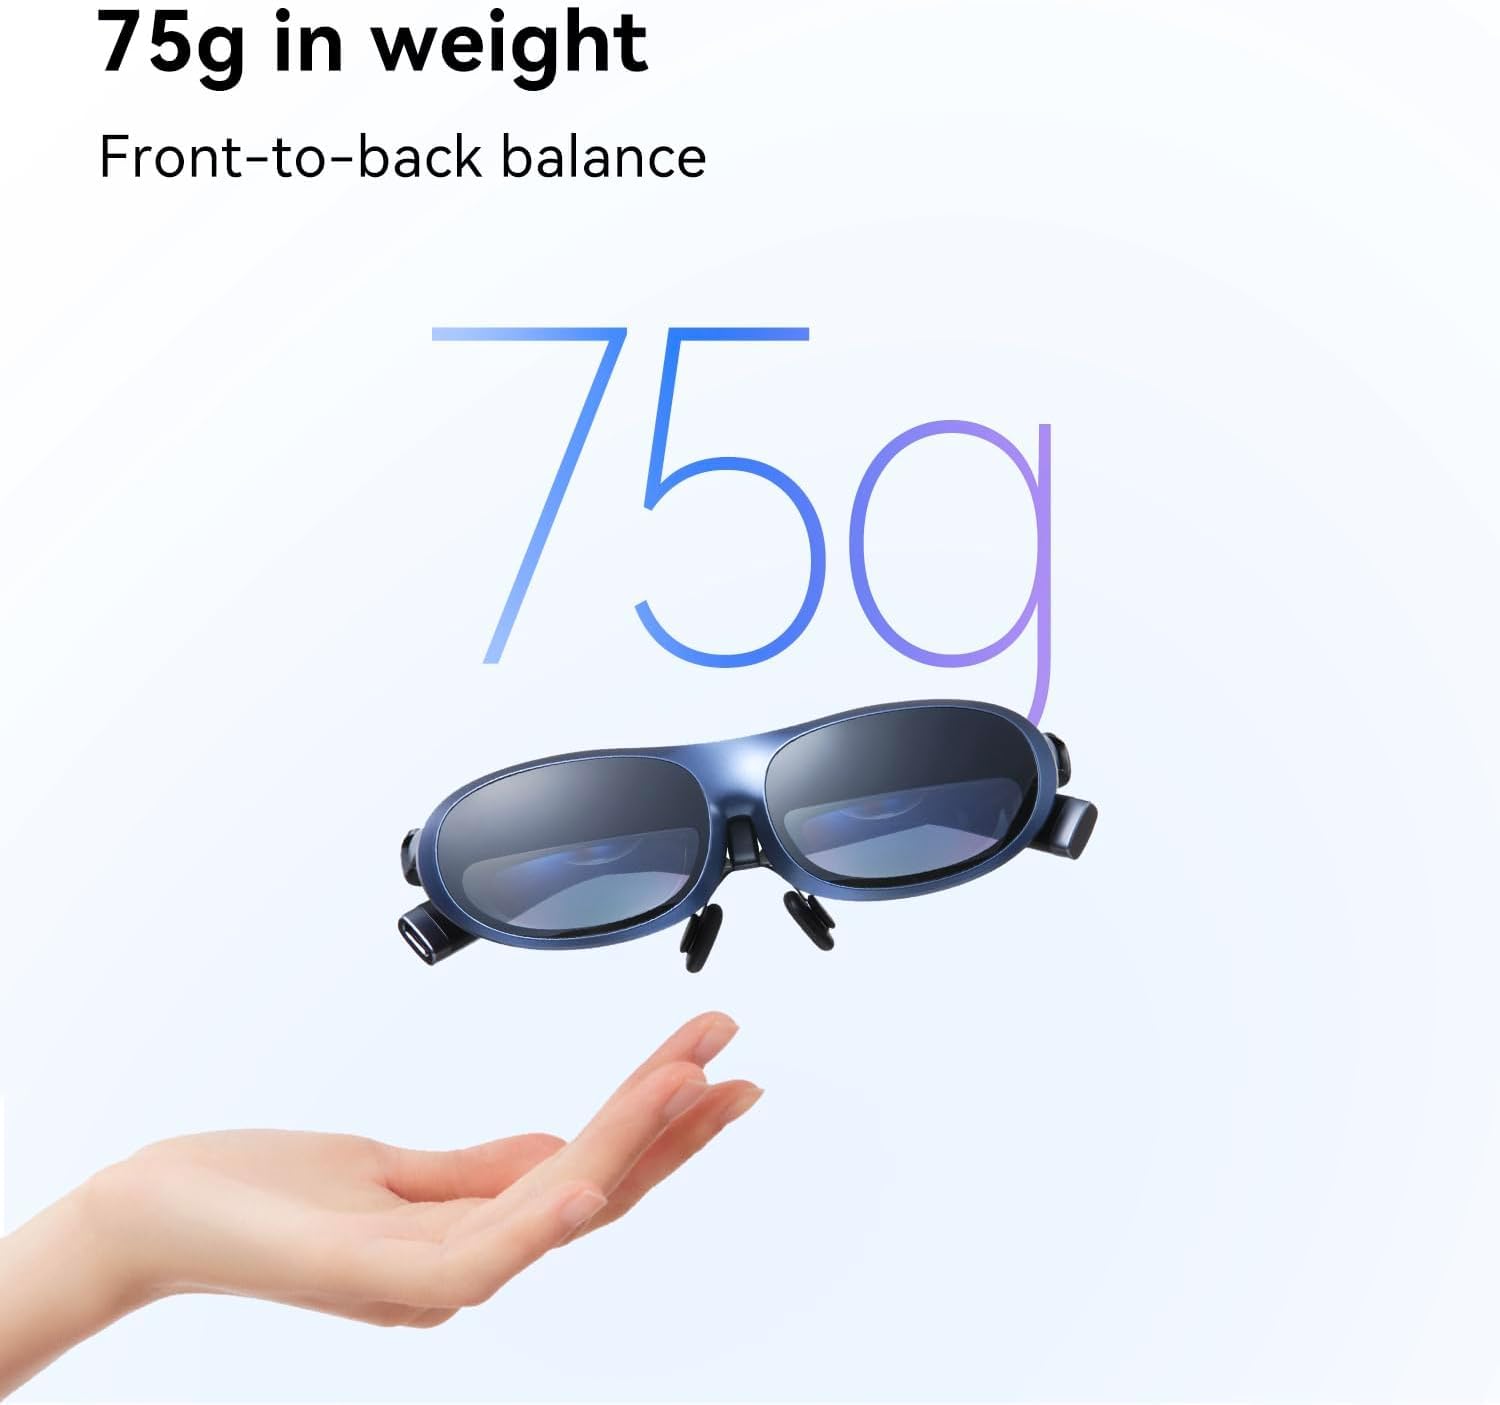 Rokid Max AR Glasses, Augmented Reality Glasses Wearable Headsets Smart Glasses for Video Display, Myopia Friendly Portable Massive 1080P Screen, Game, Watch on Android/iOS/PC/Tablets/Game Consoles - ARVRedtech.com | AR & VR Education Technology